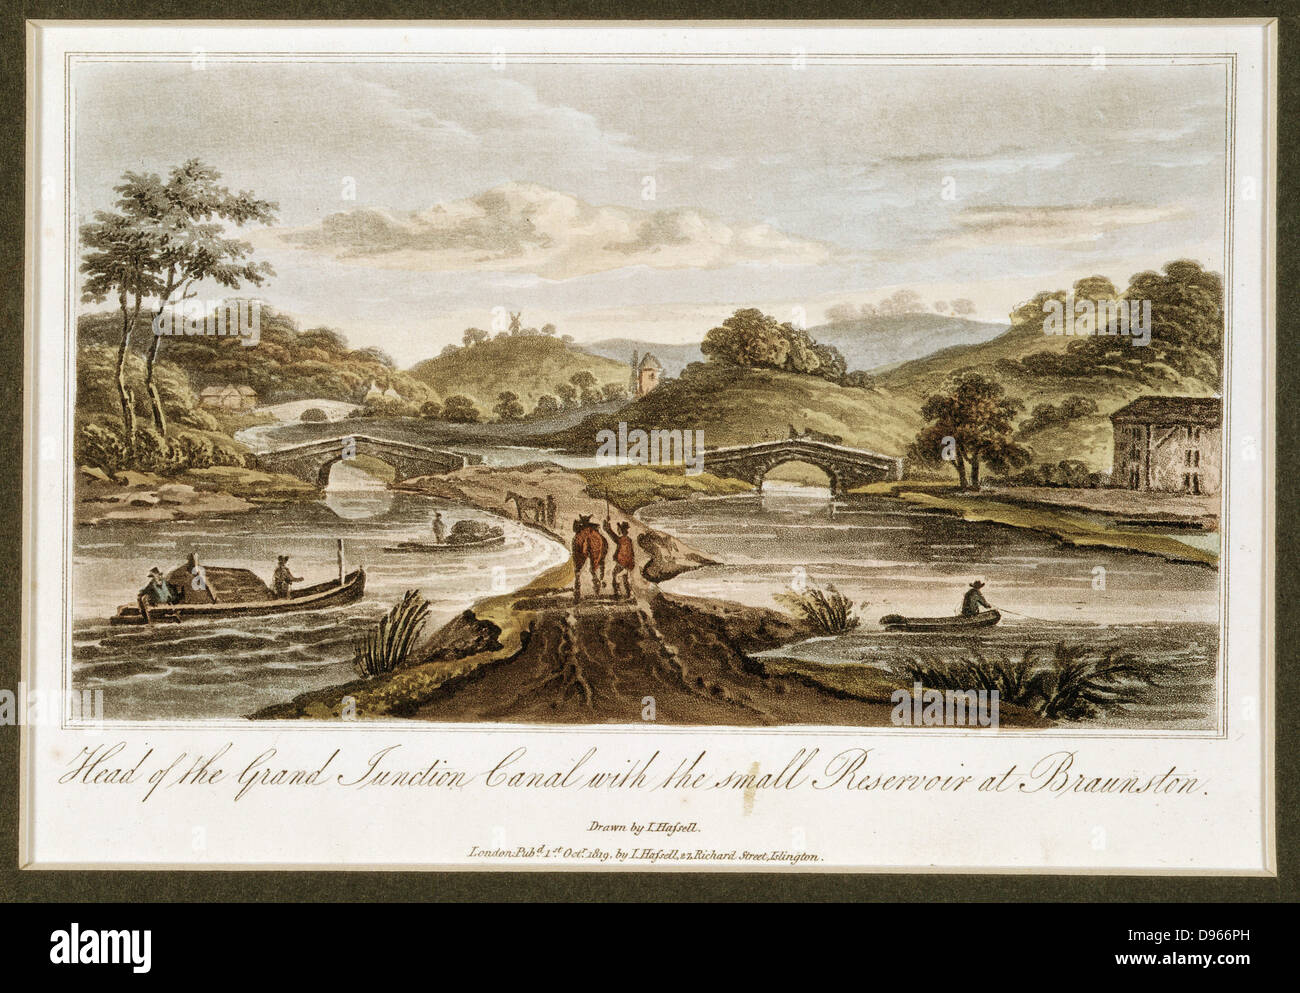 Grand Junction Canal: Head of canal at Braunston, Northamptonshire, showing small reservoir. Part of network linking London with Midlands manufacturing towns, and with Liverpool. Chief engineer, William Jessop: Resident engineer, James Barnes. From J.Hassell 'Tour of the Grand Junction Canal', London, 1819. Aquatint. Stock Photo